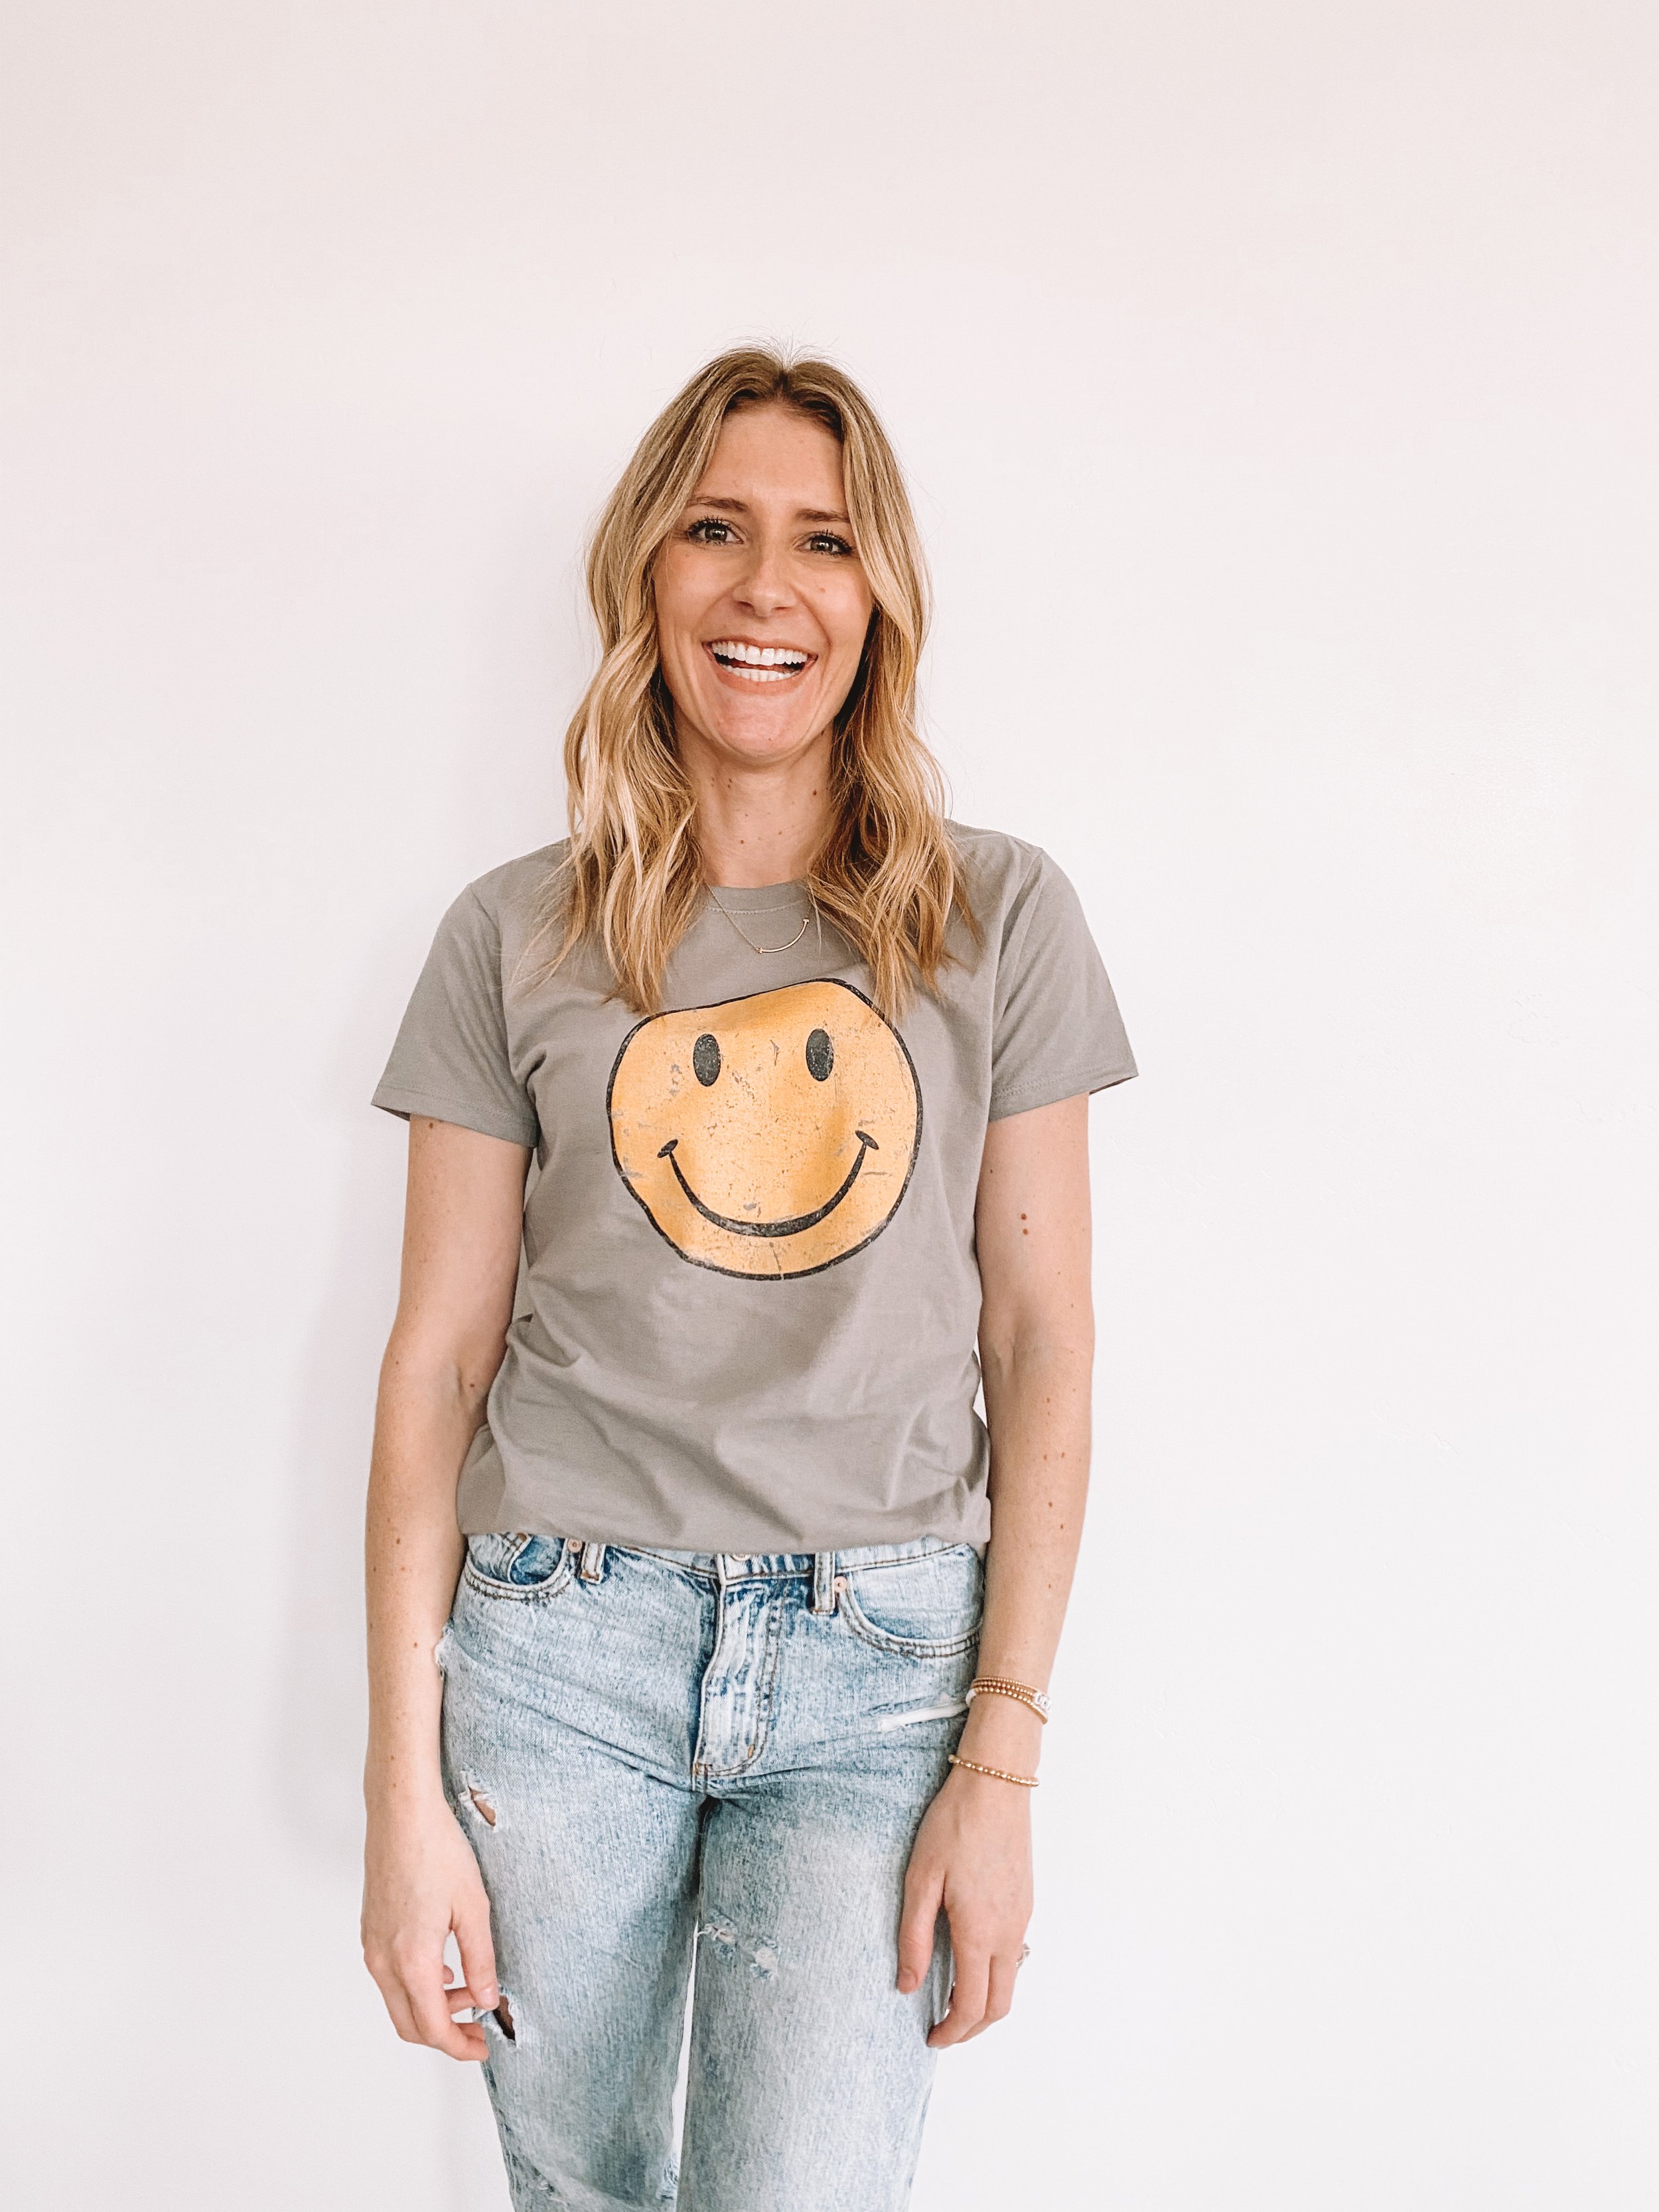 Women's Smiley Face Tees + Shirts